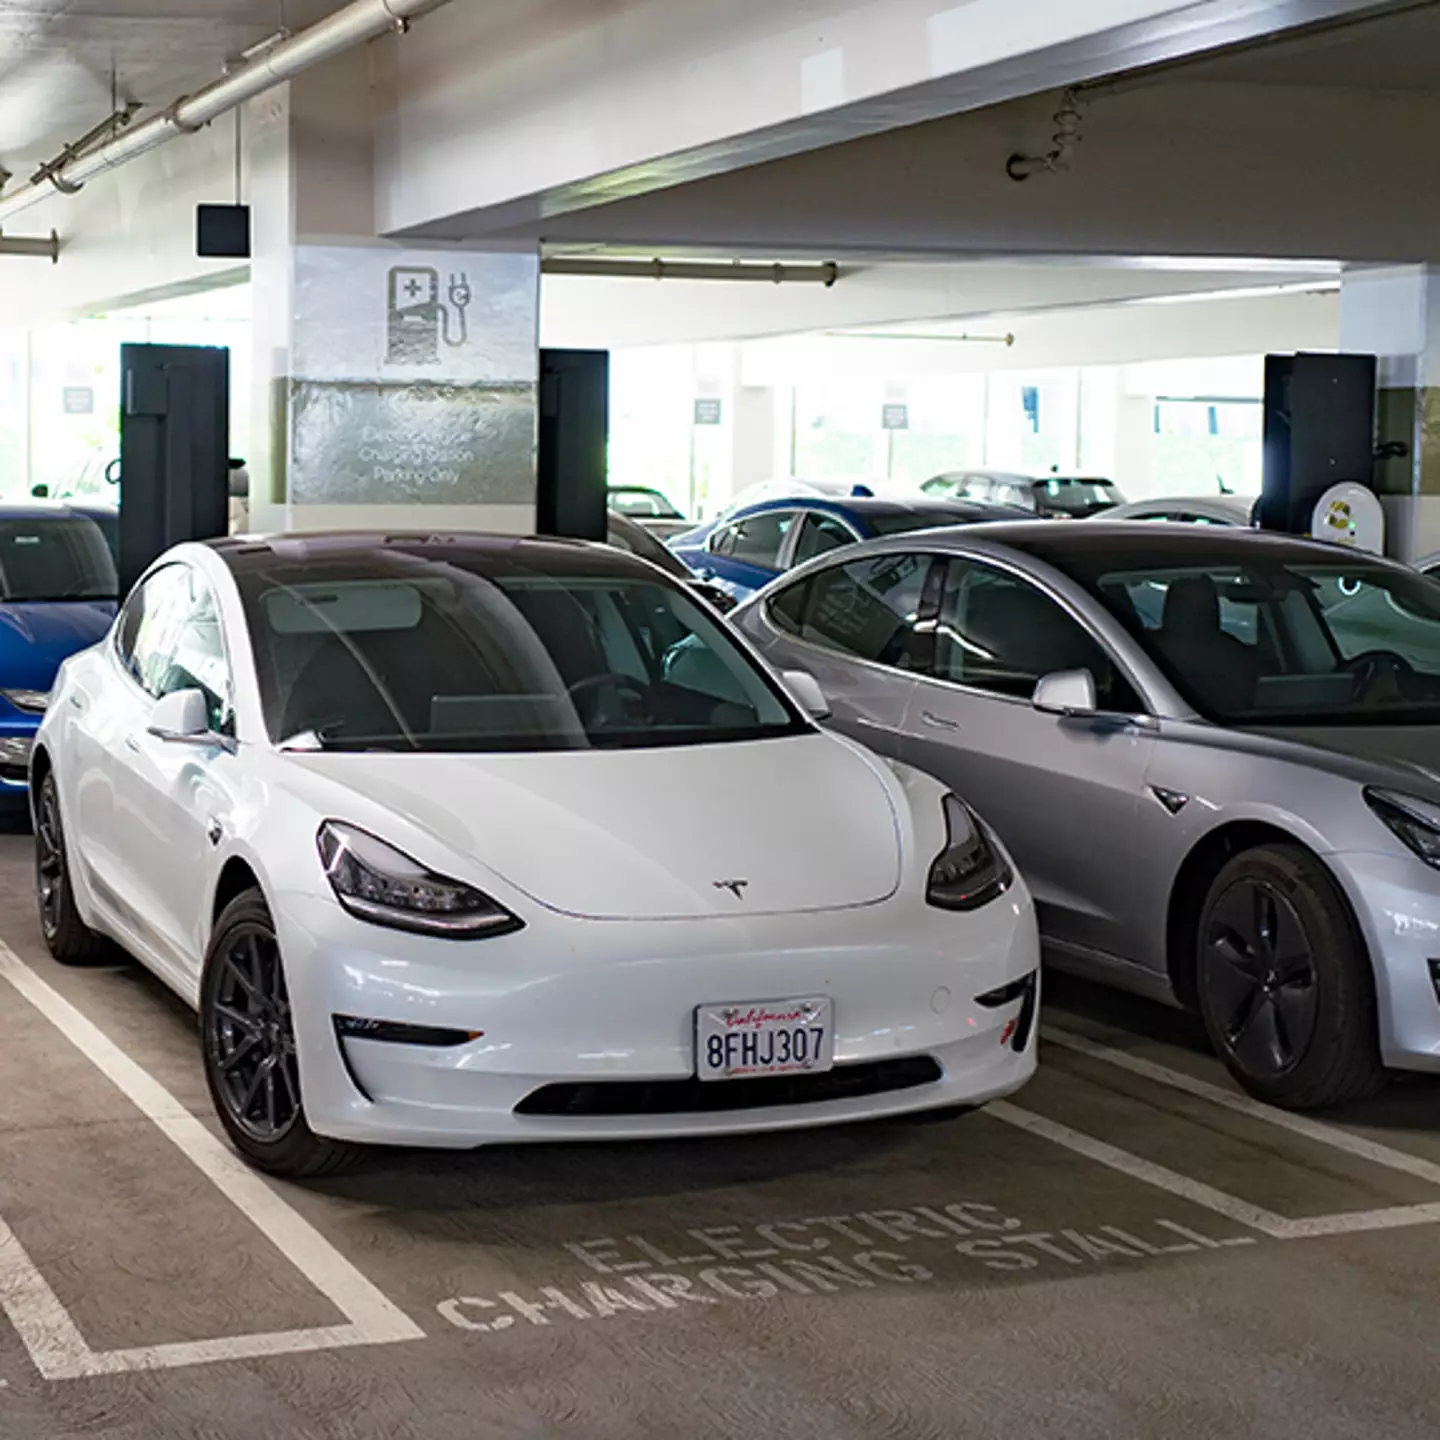 Former Tesla owner 'locked out of his car until he pays $26,000 for a new battery'